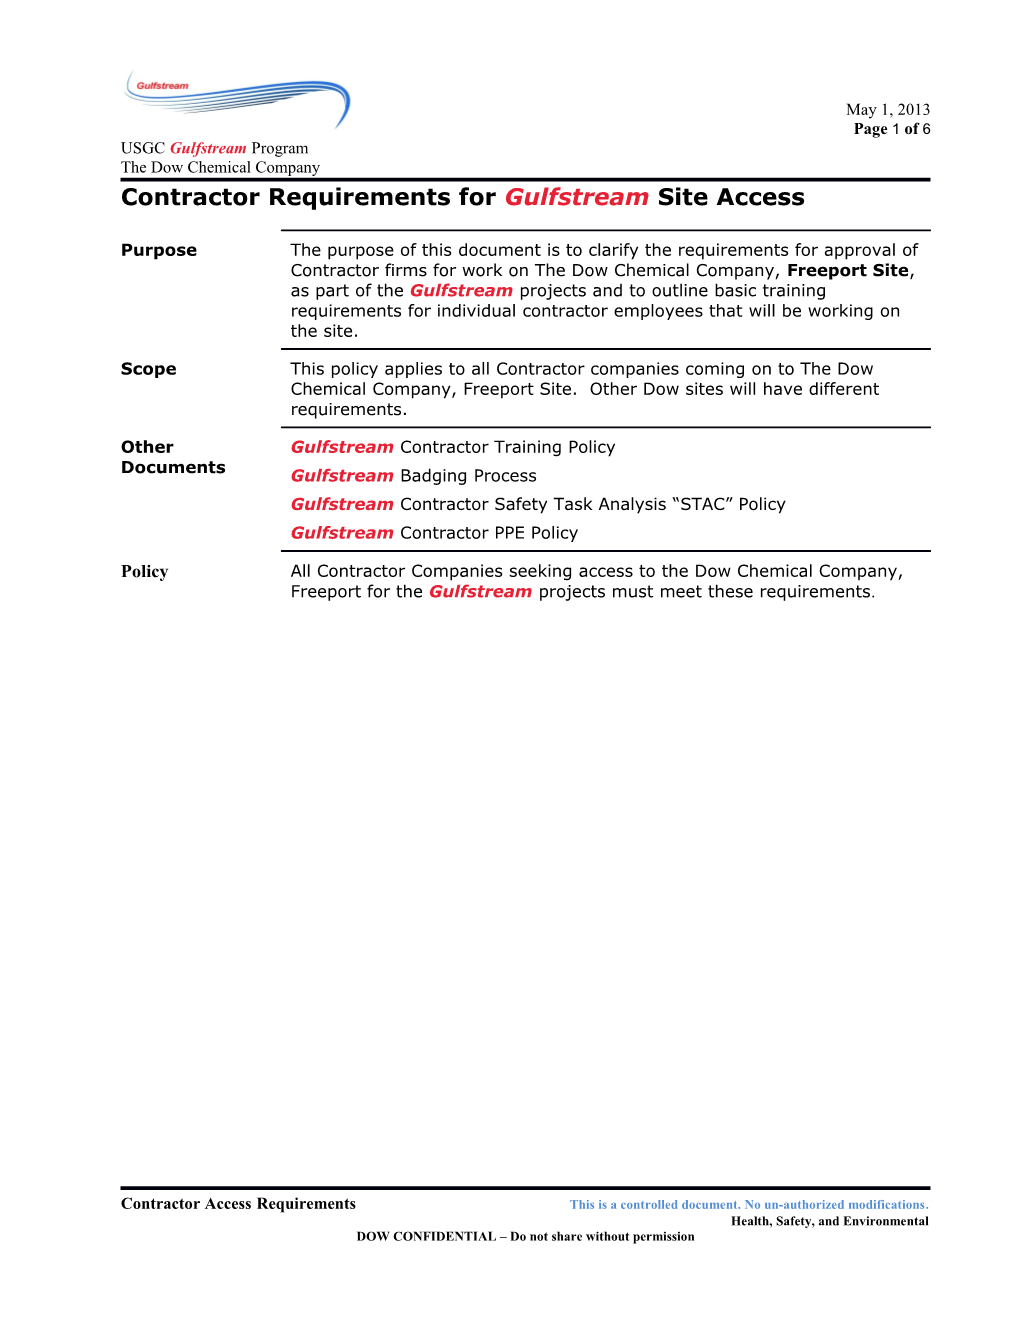 Contractor Requirements for Gulfstream Site Access